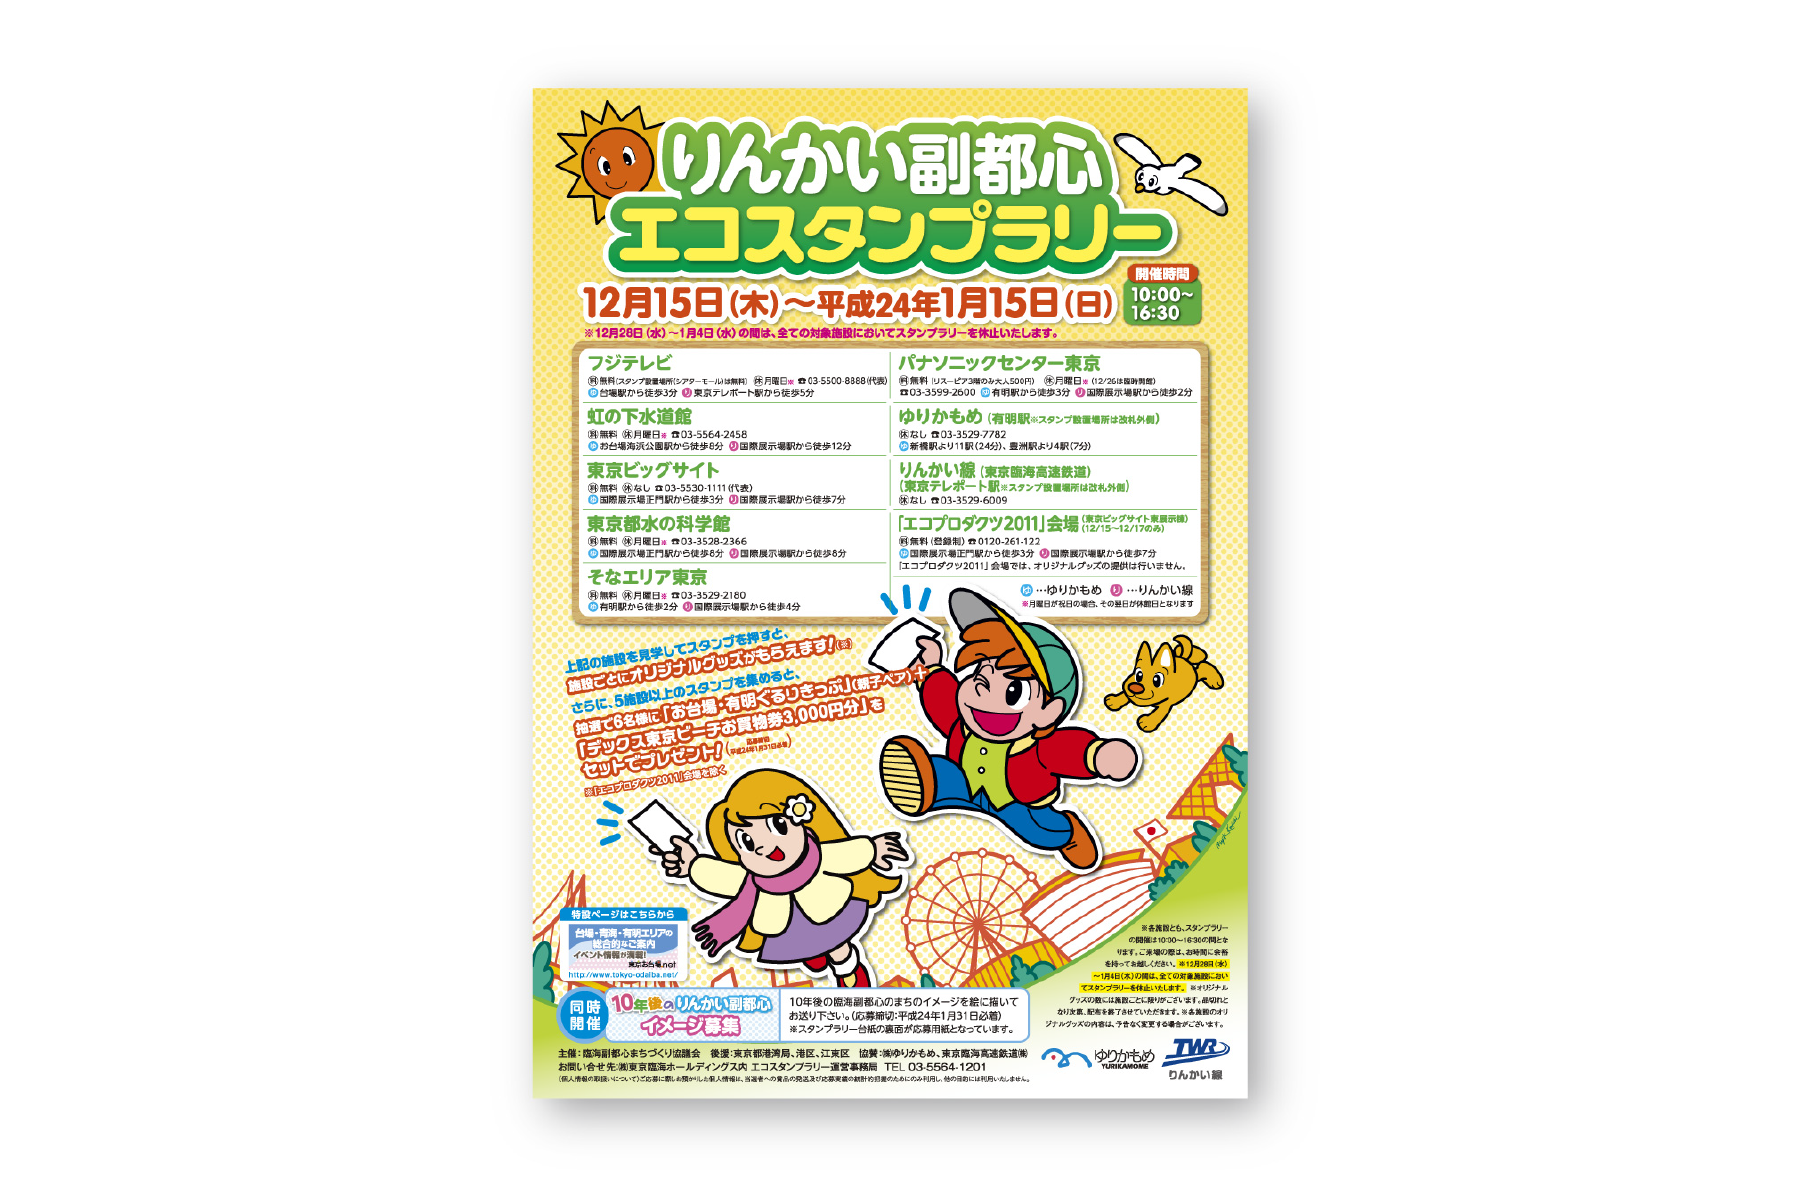 Public notice “New Tokyo waterfront subcenter event poster”ⓒ臨界副都心まちづくり協議会